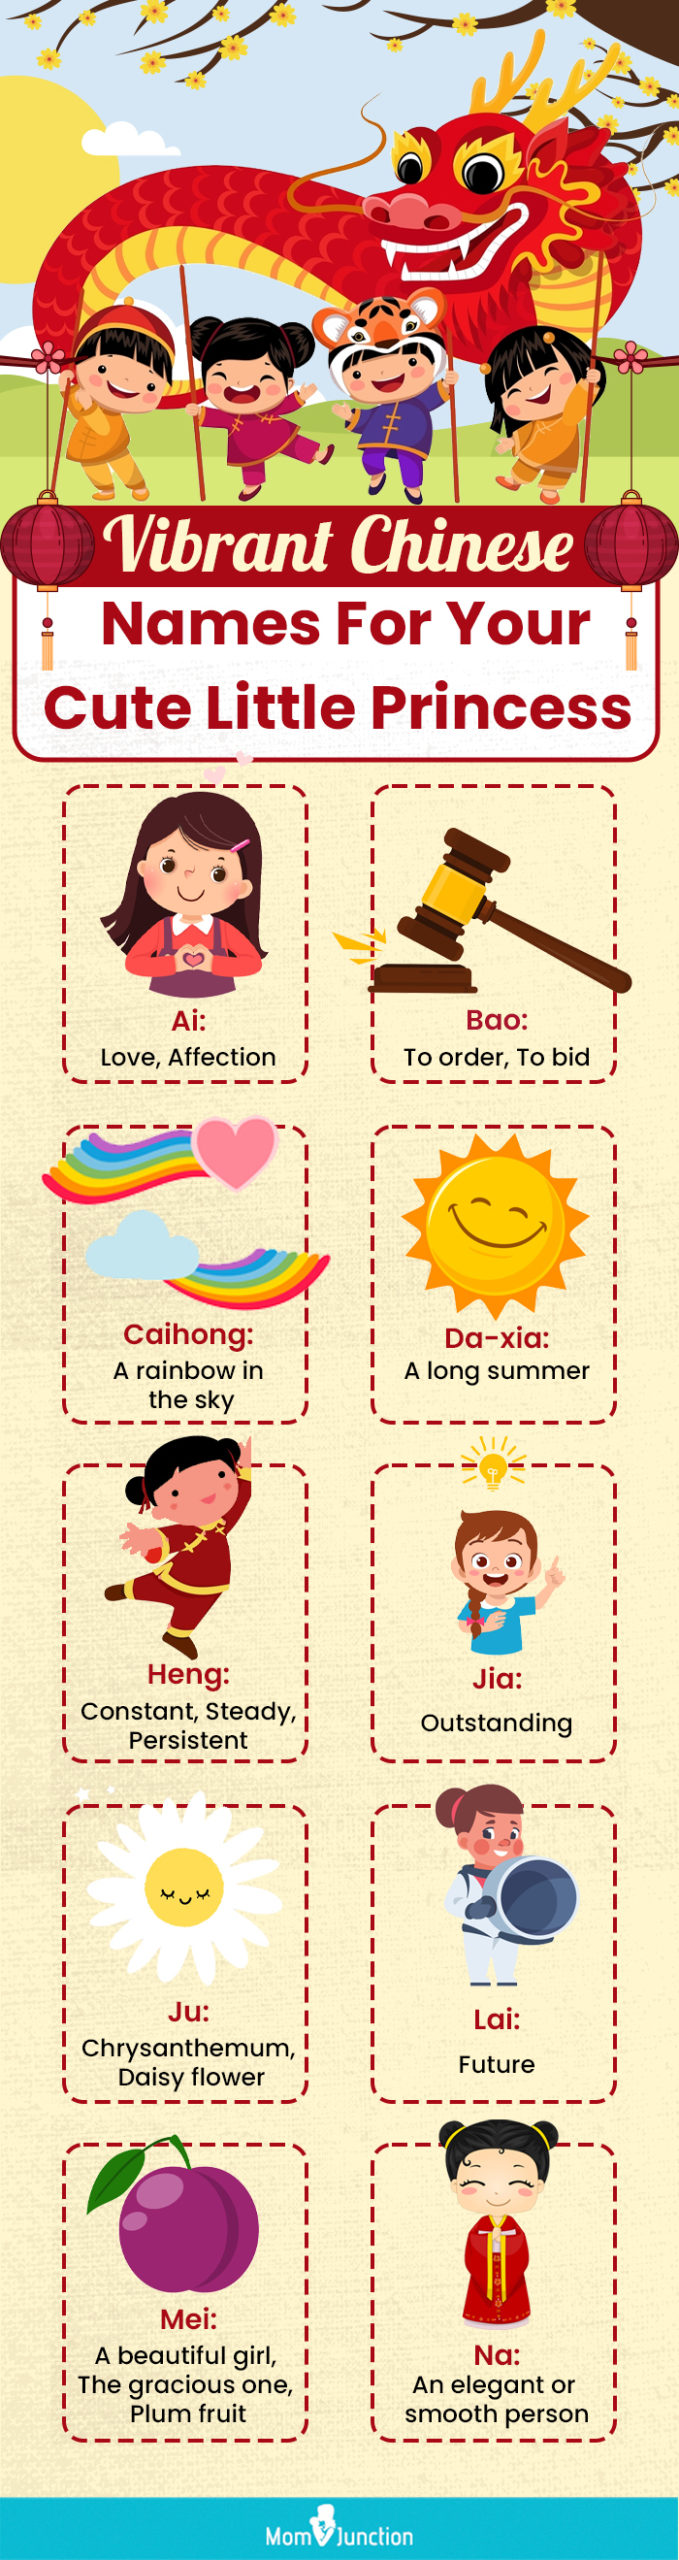 vibrant chinese names for your cute little princess (infographic)